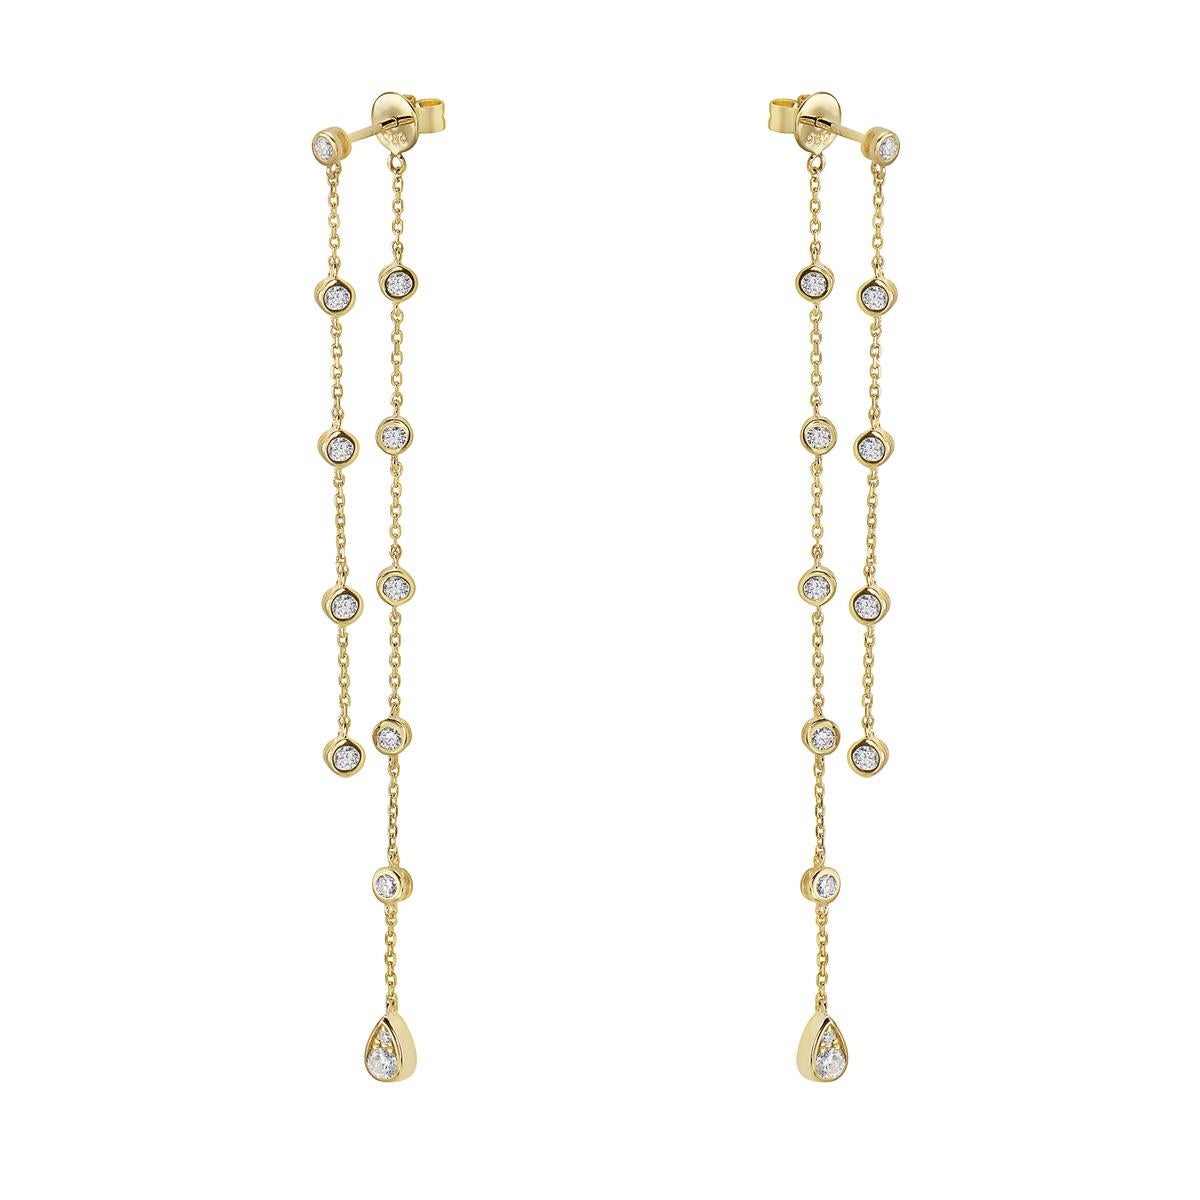 With these exquisite diamond dangle earrings, style and glamour are in the spotlight. These yellow gold dangle diamond by-the-yard earrings are set in 14-karat gold and made from 2.4 grams of gold. The color of the diamonds is GH. The clarity is